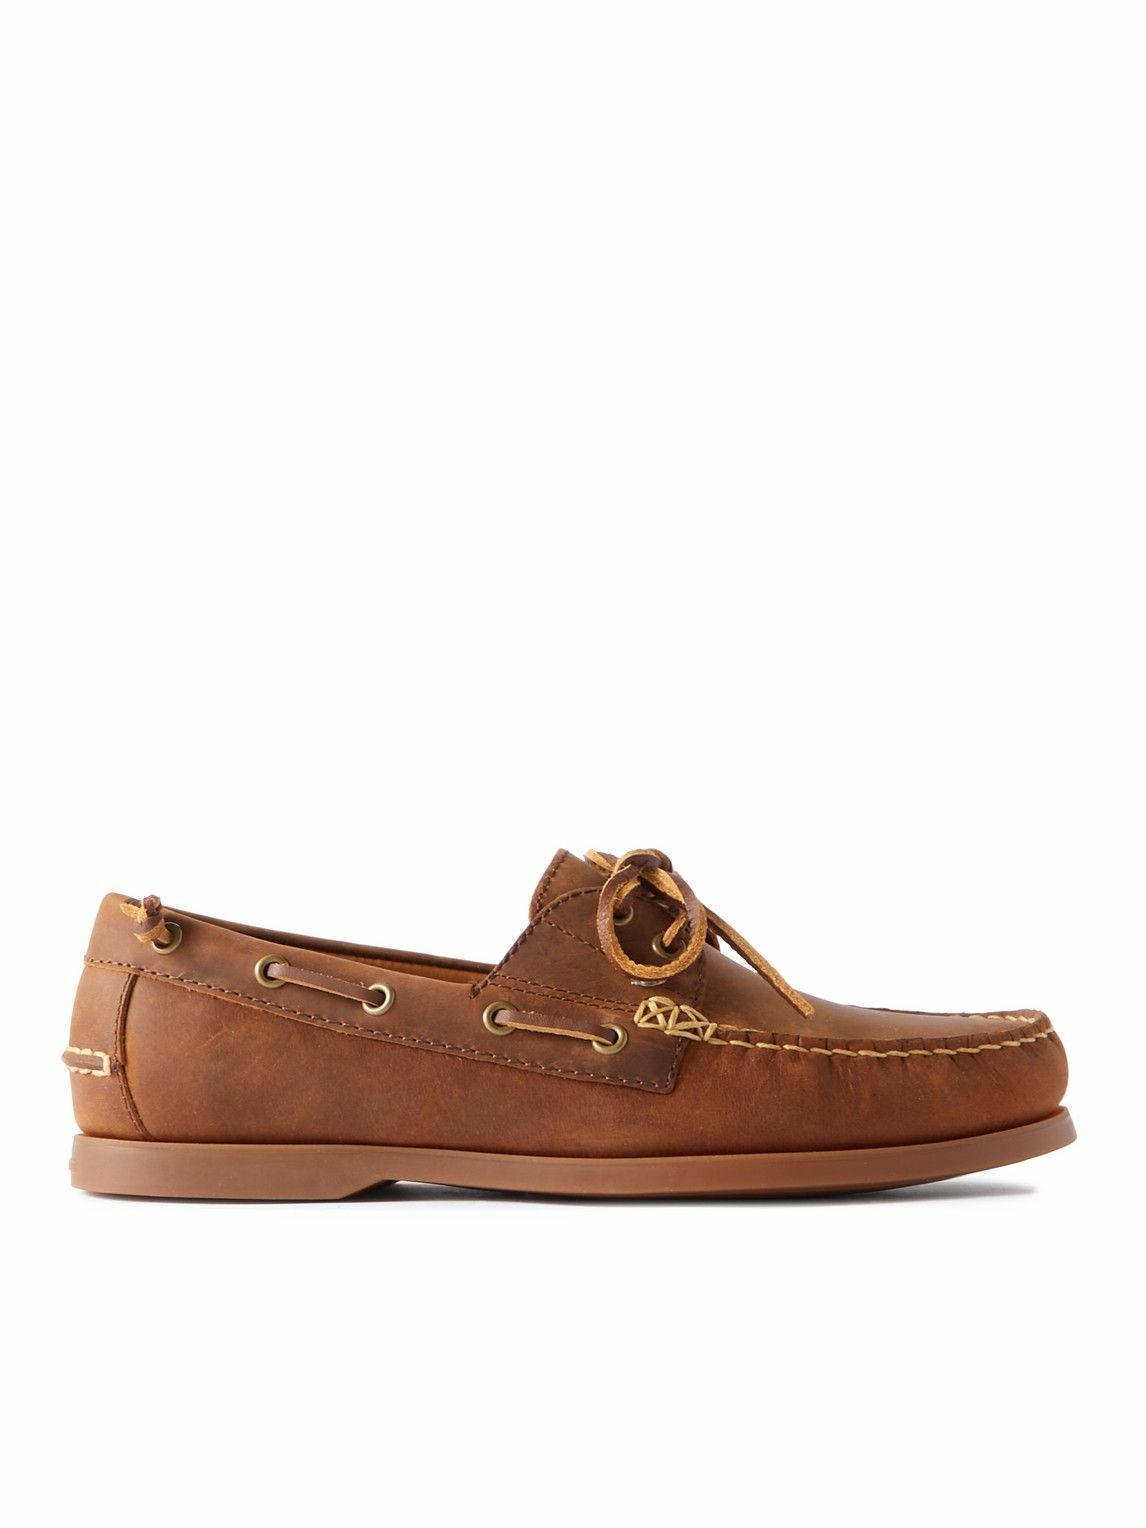 Photo: Polo Ralph Lauren - Merton Leather Boat Shoes - Brown